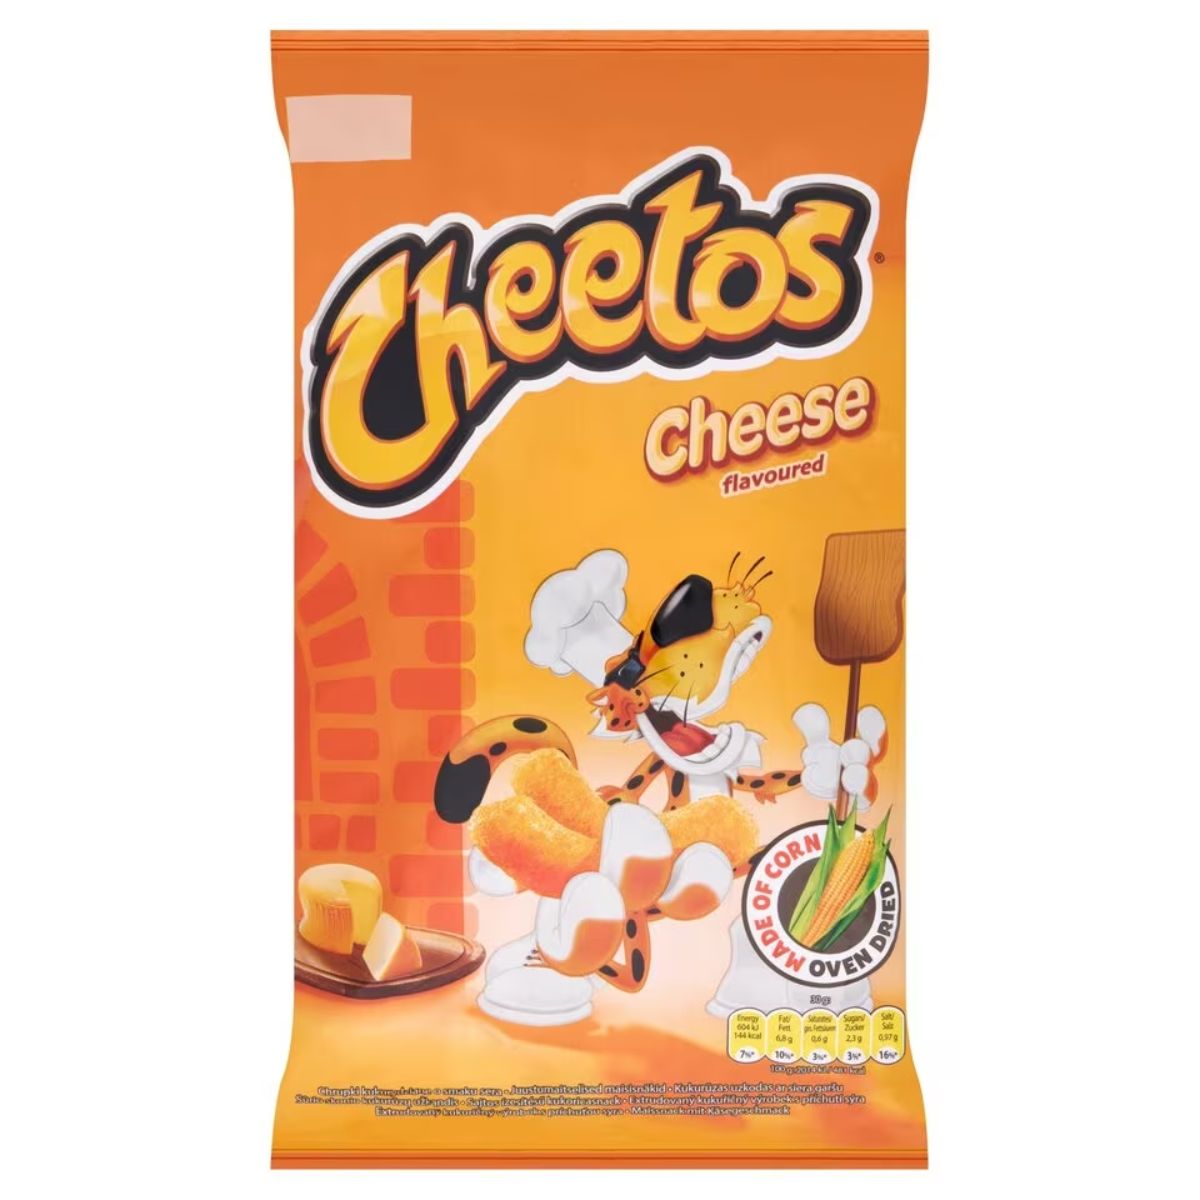 Cheetos - Cheese - 85g bag on a white background.